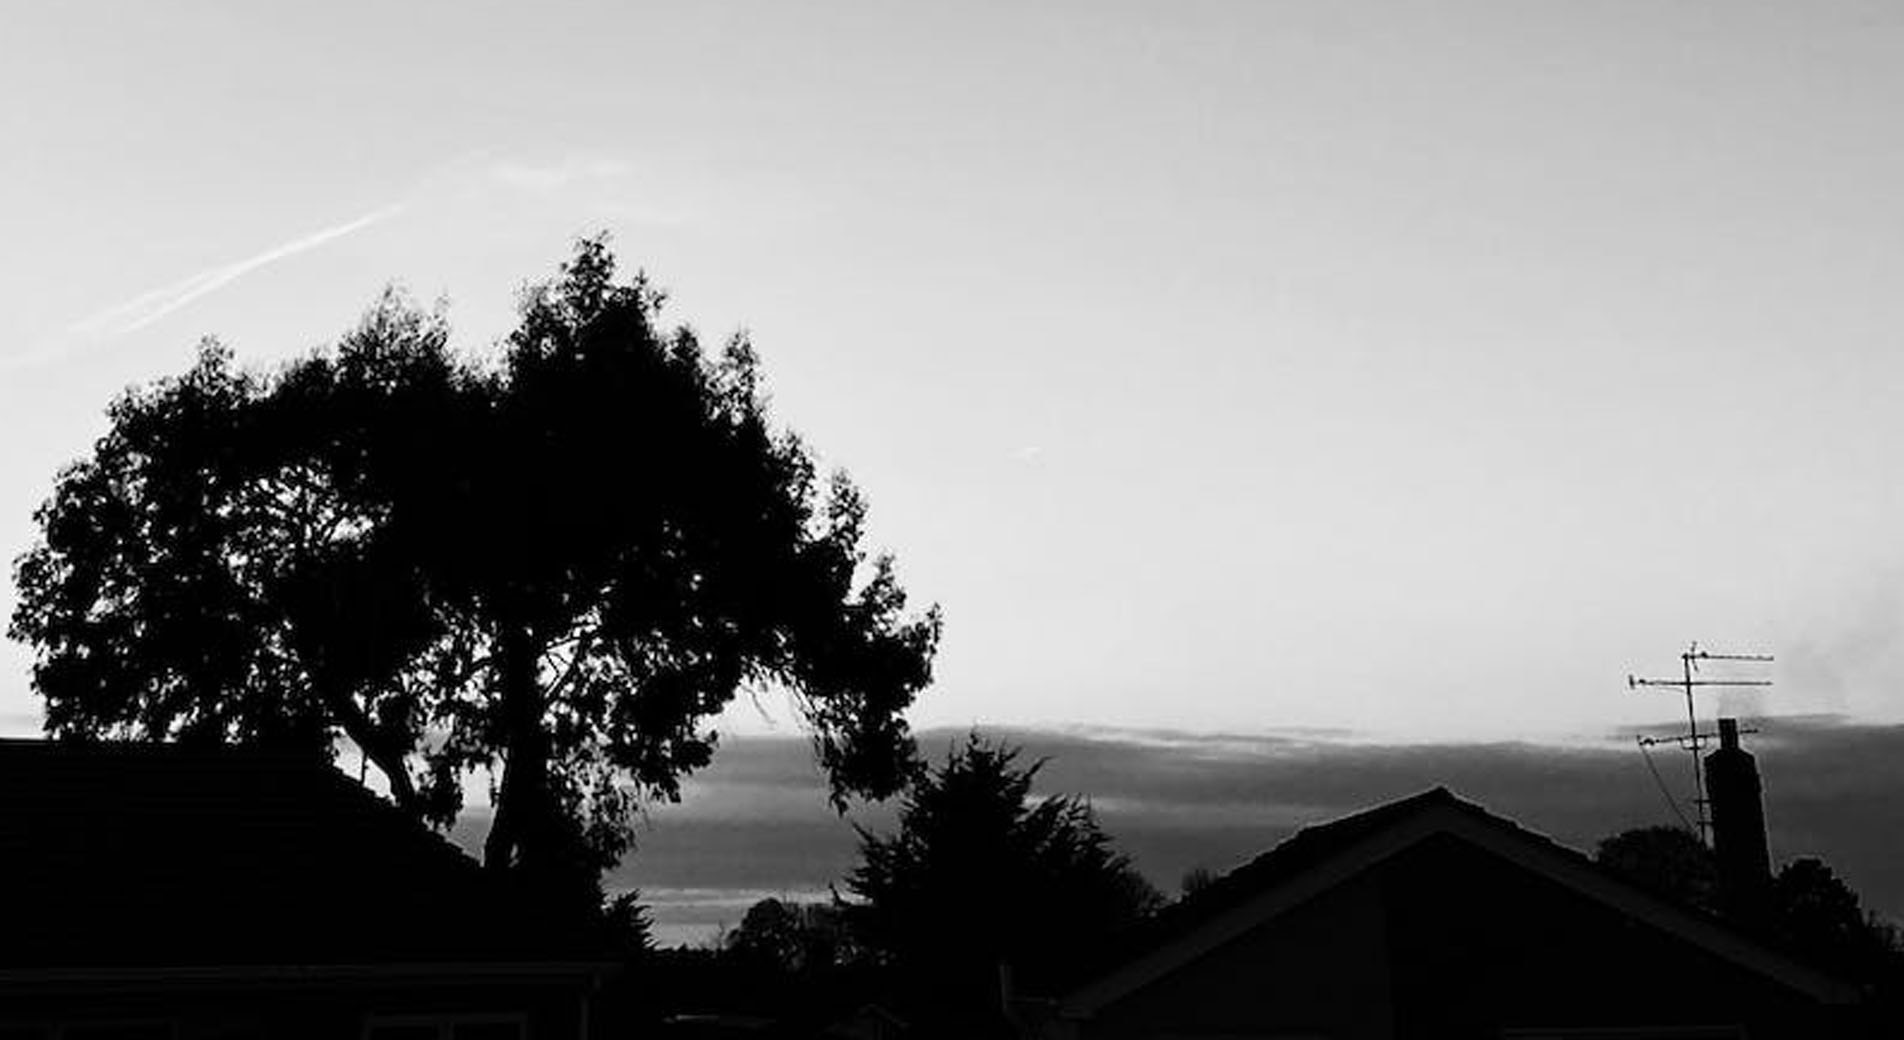 black and white landscape image of neighbourhood. tops of houses are visible, as is large tree, powerlines. clouds on horizon in distance.